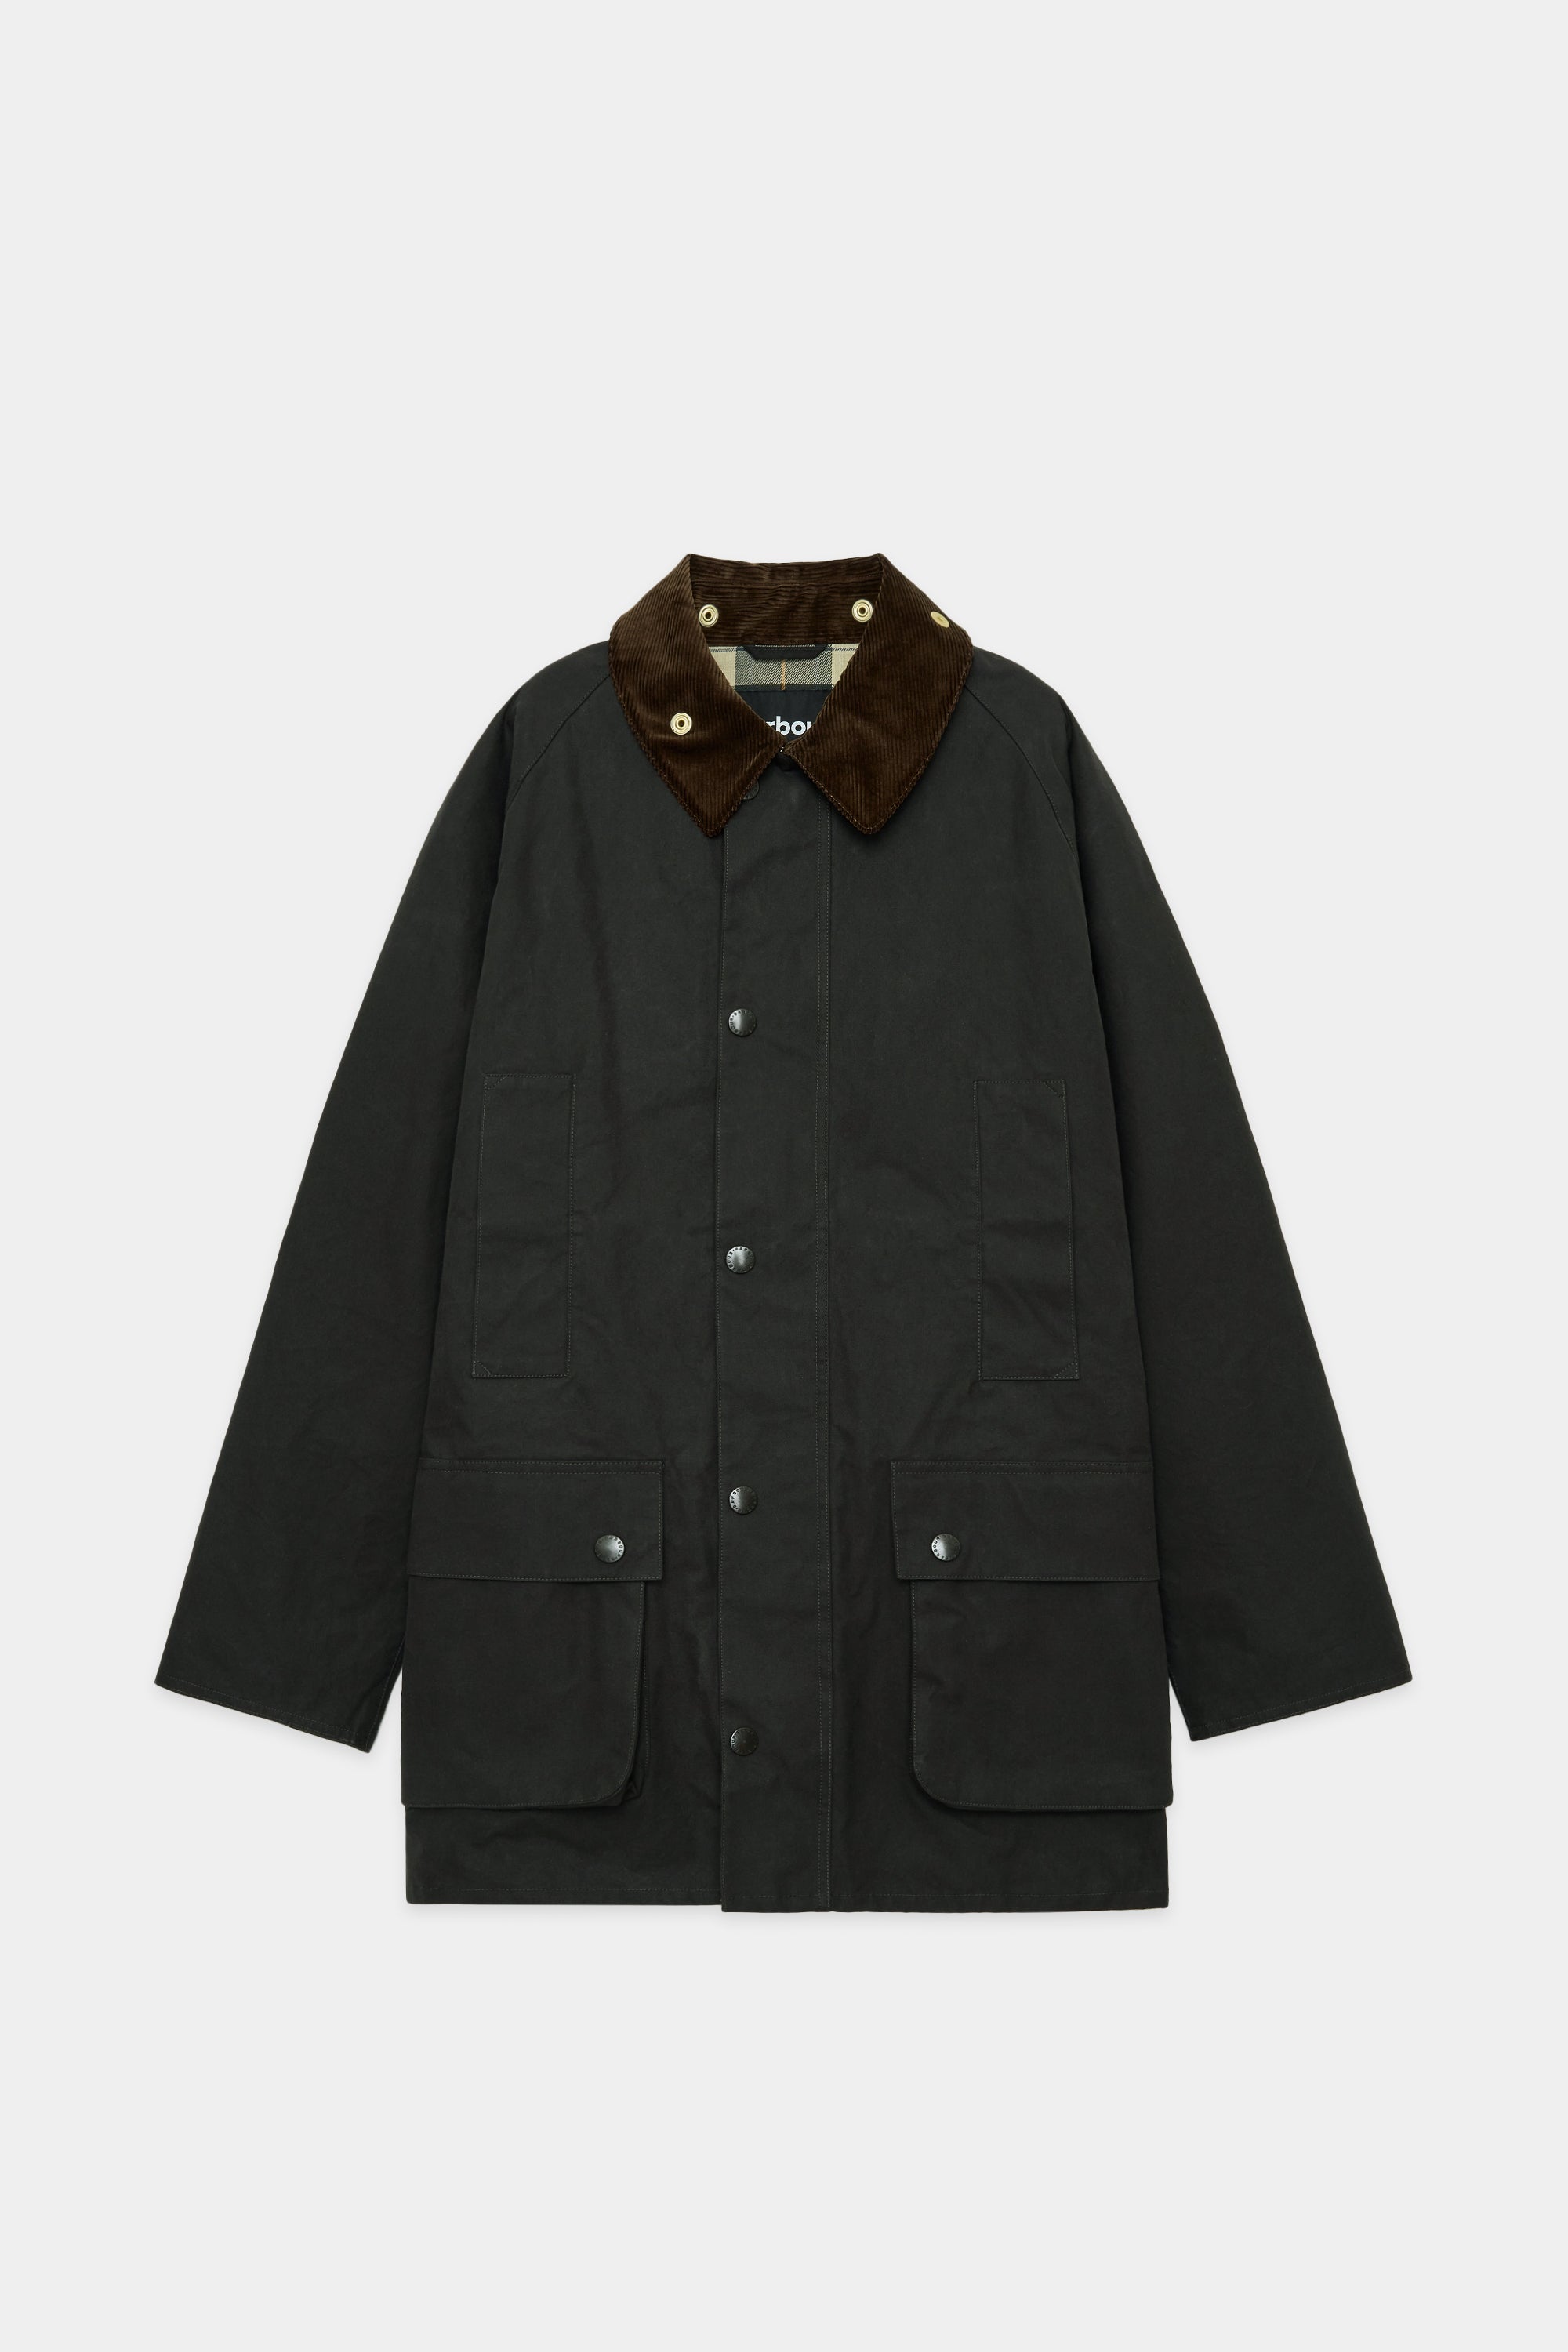 Barbour x MARKAWARE for EDIFICE BEDALE定価¥88000